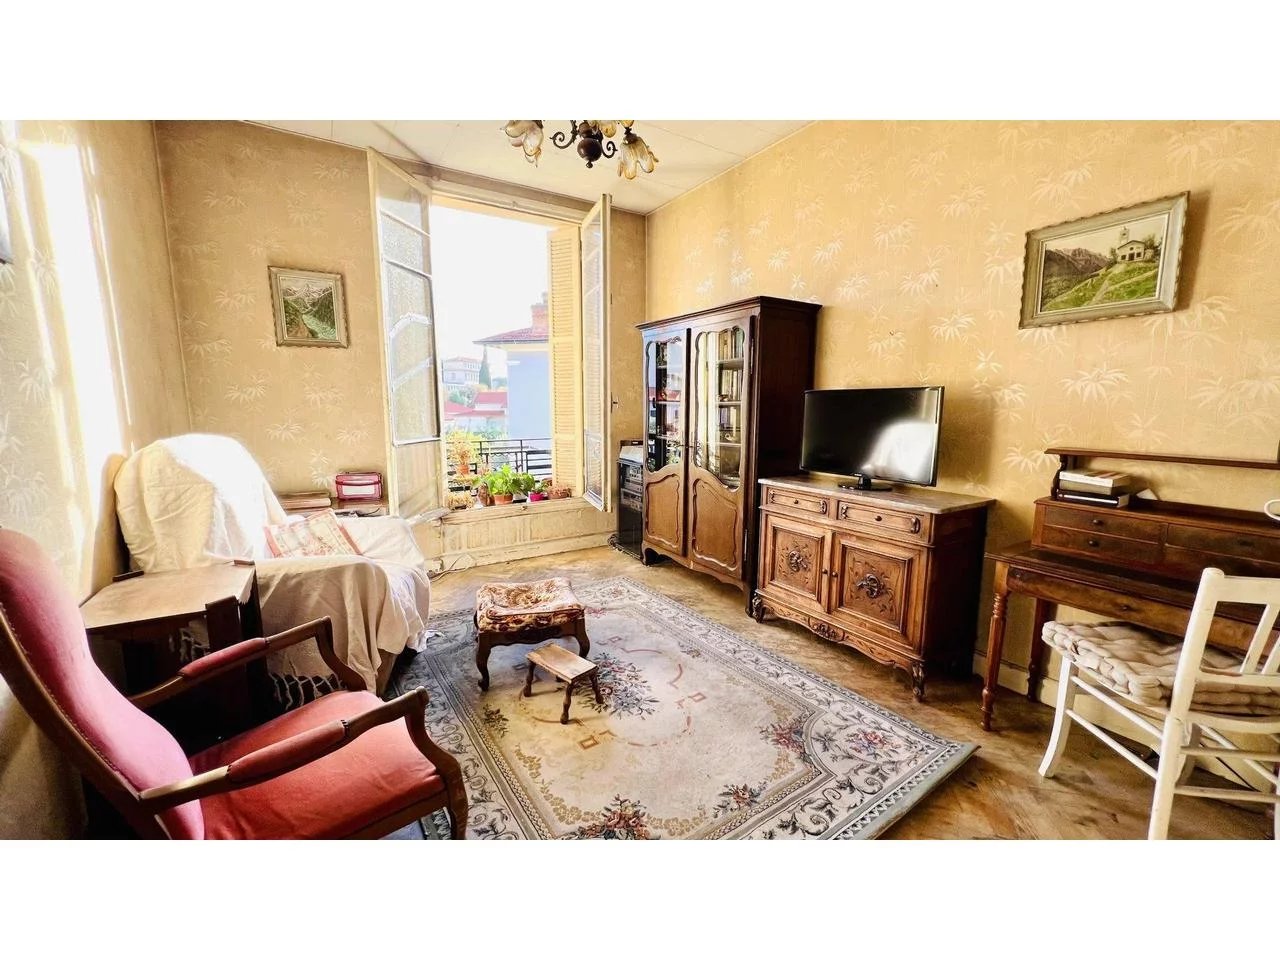 Appartement  3 Rooms 54m2  for sale   169 000 €